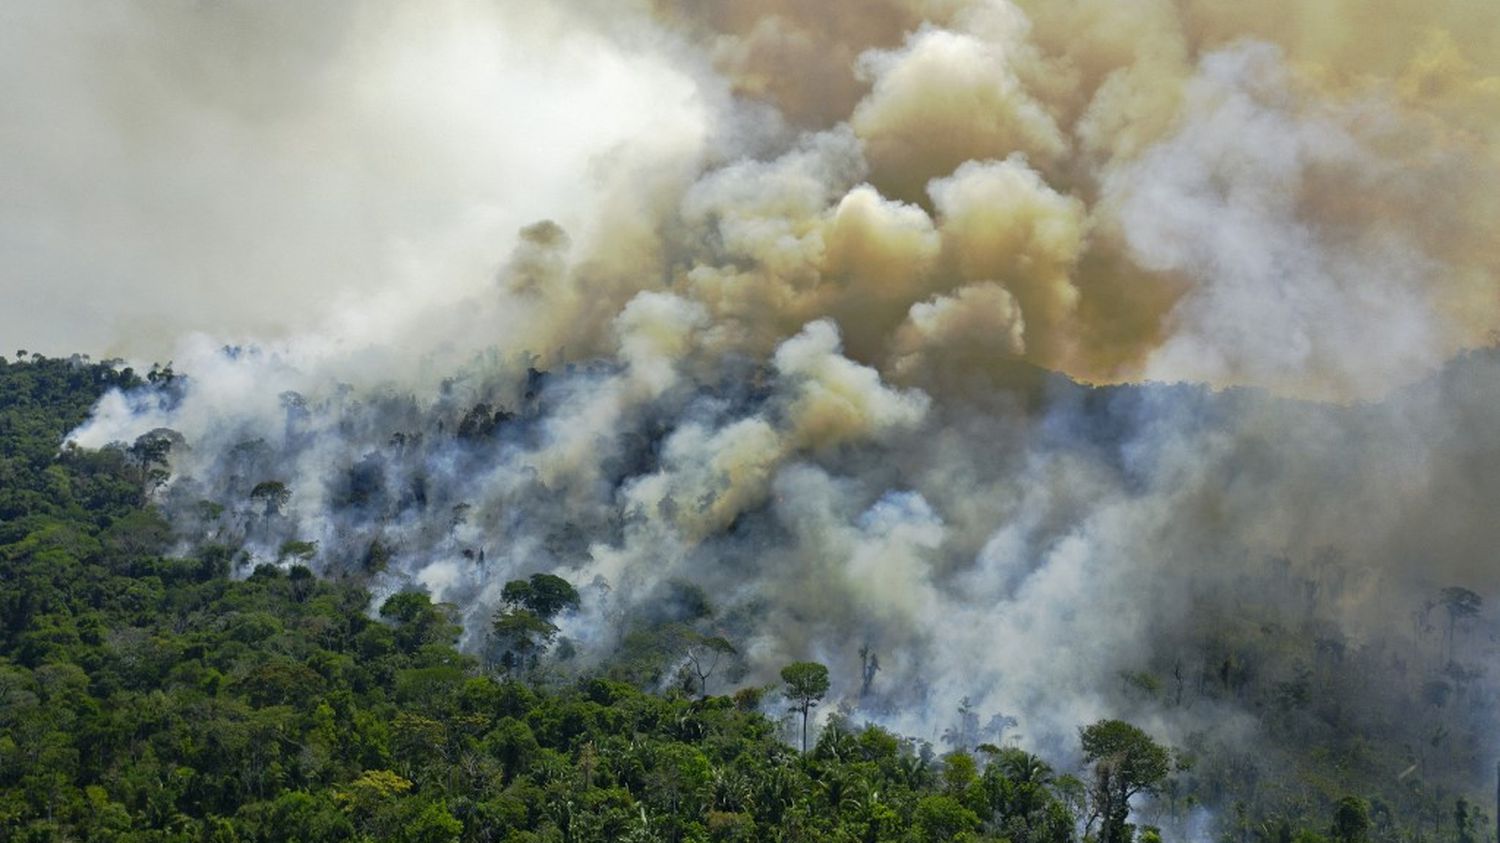 Brazil: more fires have been detected in the Amazon since January than in all of 2021
